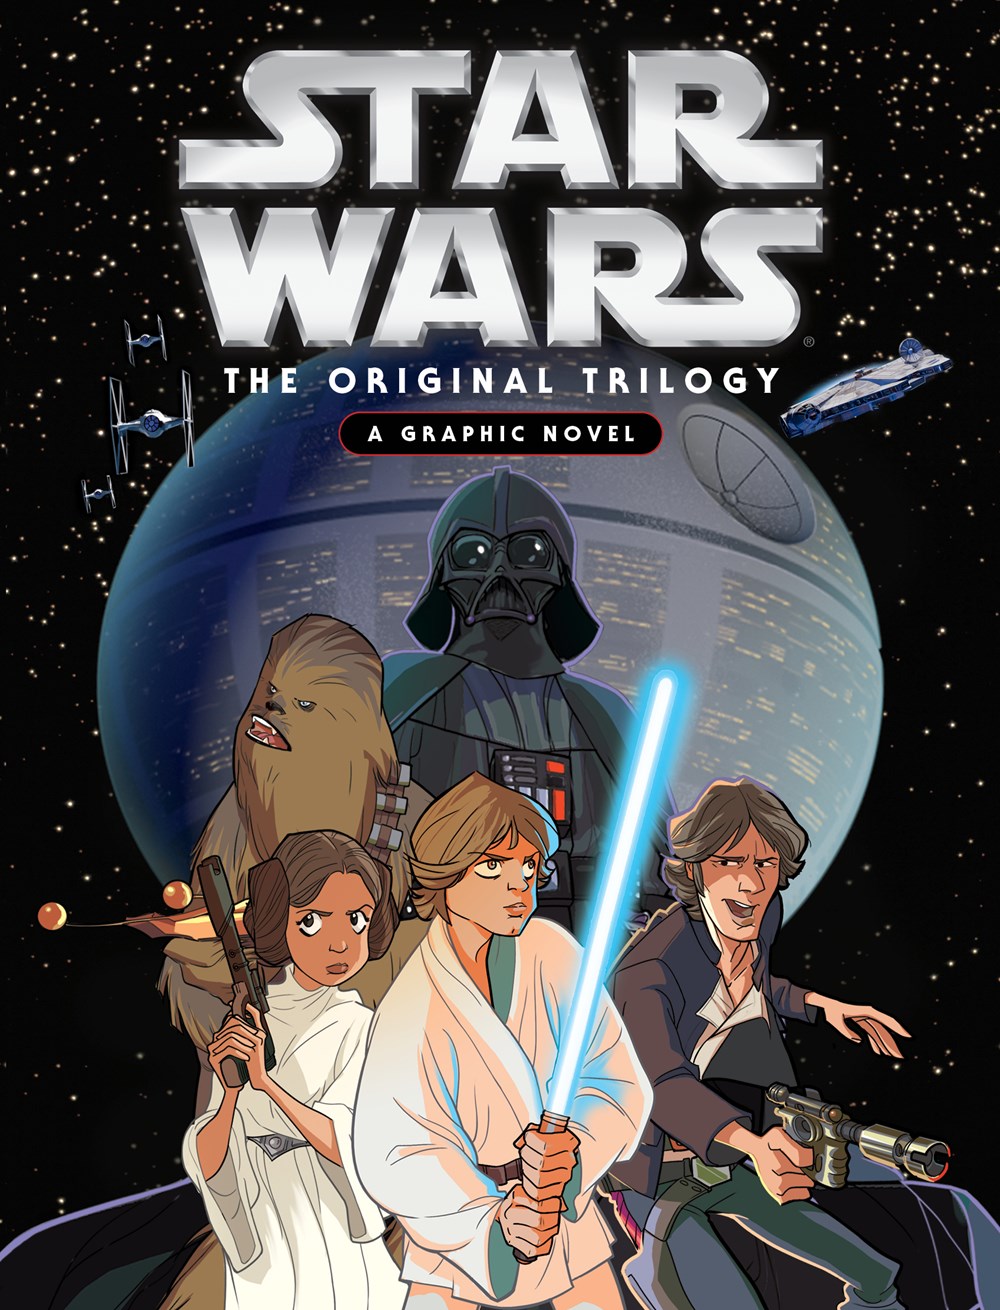 https://static.wikia.nocookie.net/starwars/images/c/cc/Original_Trilogy_graphic_novel_cover.jpg/revision/latest?cb=20151022202537